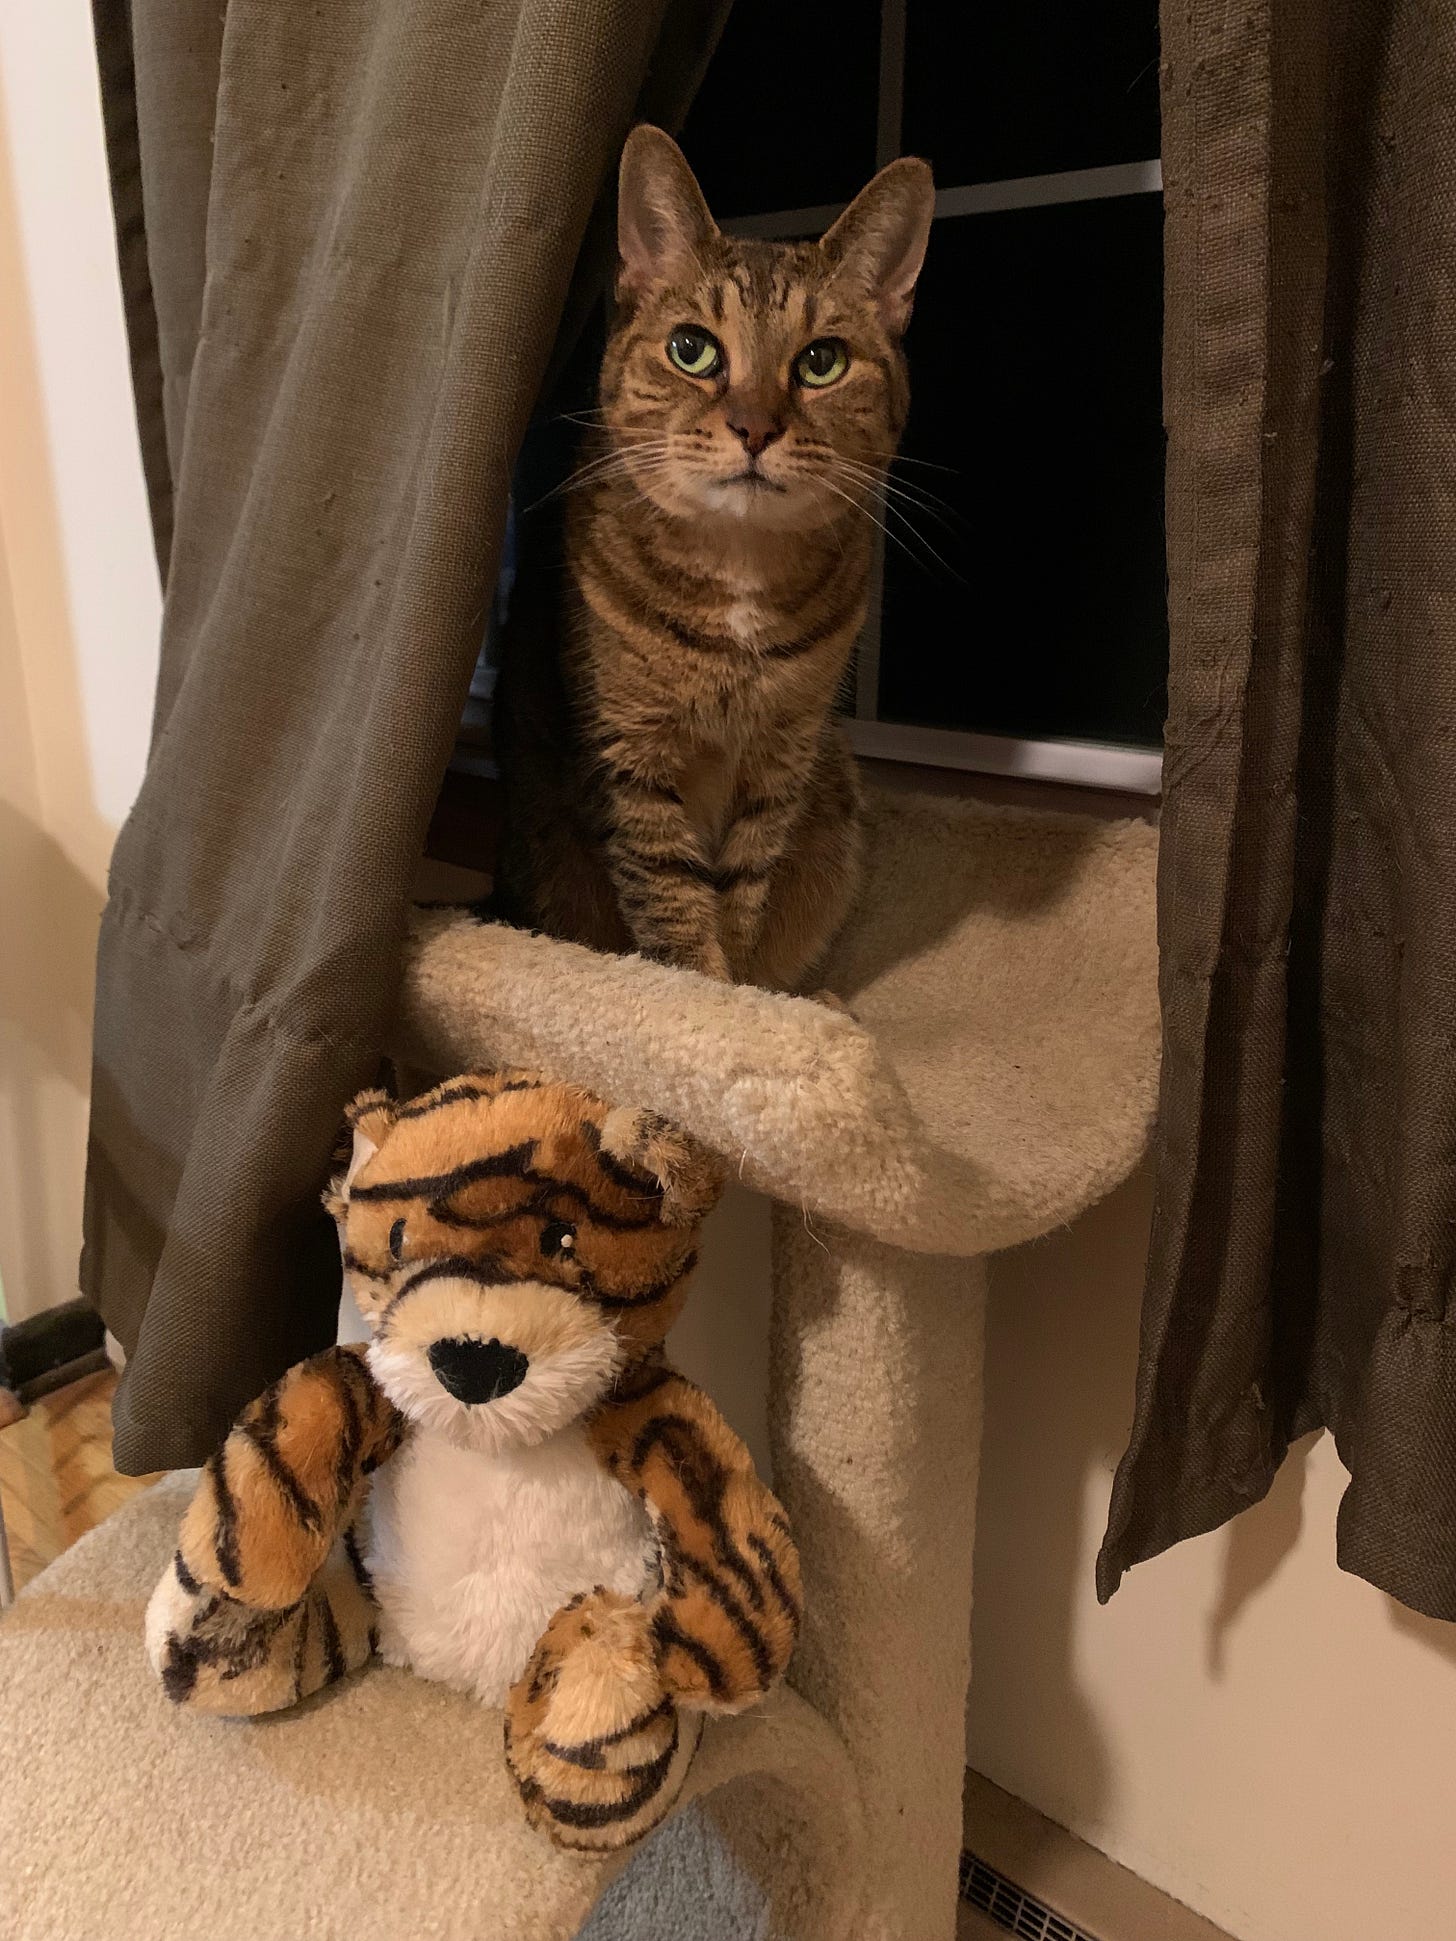 A brown tabby cat sitting on a small cat tower, looking up and to the left. On the level directly below her is a stuffed animal tiger.